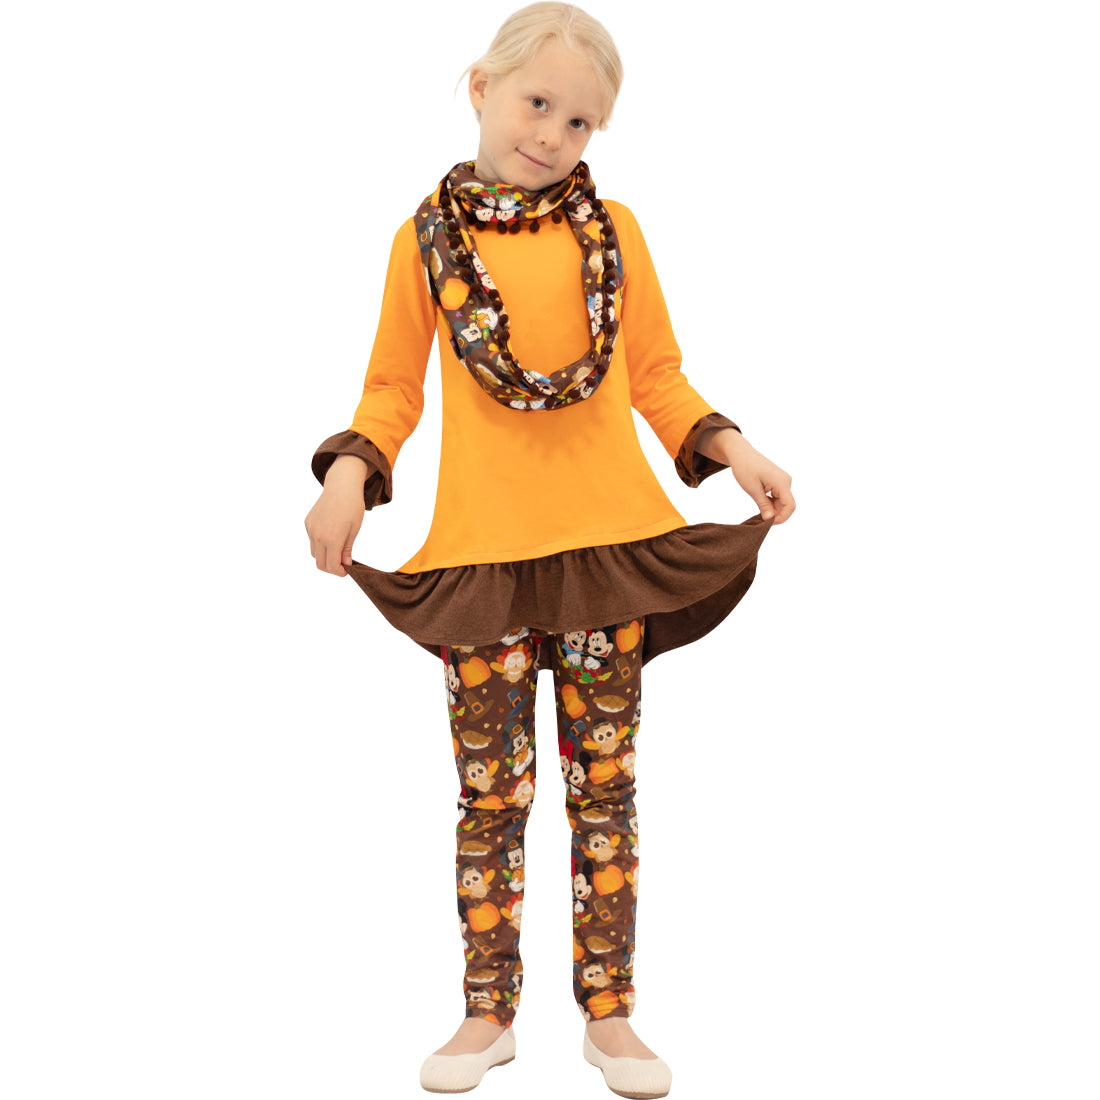 Baby Girls Fall Winter Thanksgiving Minnie Mouse Inspired Give Thanks Outfit Set With Scarf - Brown/Orange - Angeline Kids